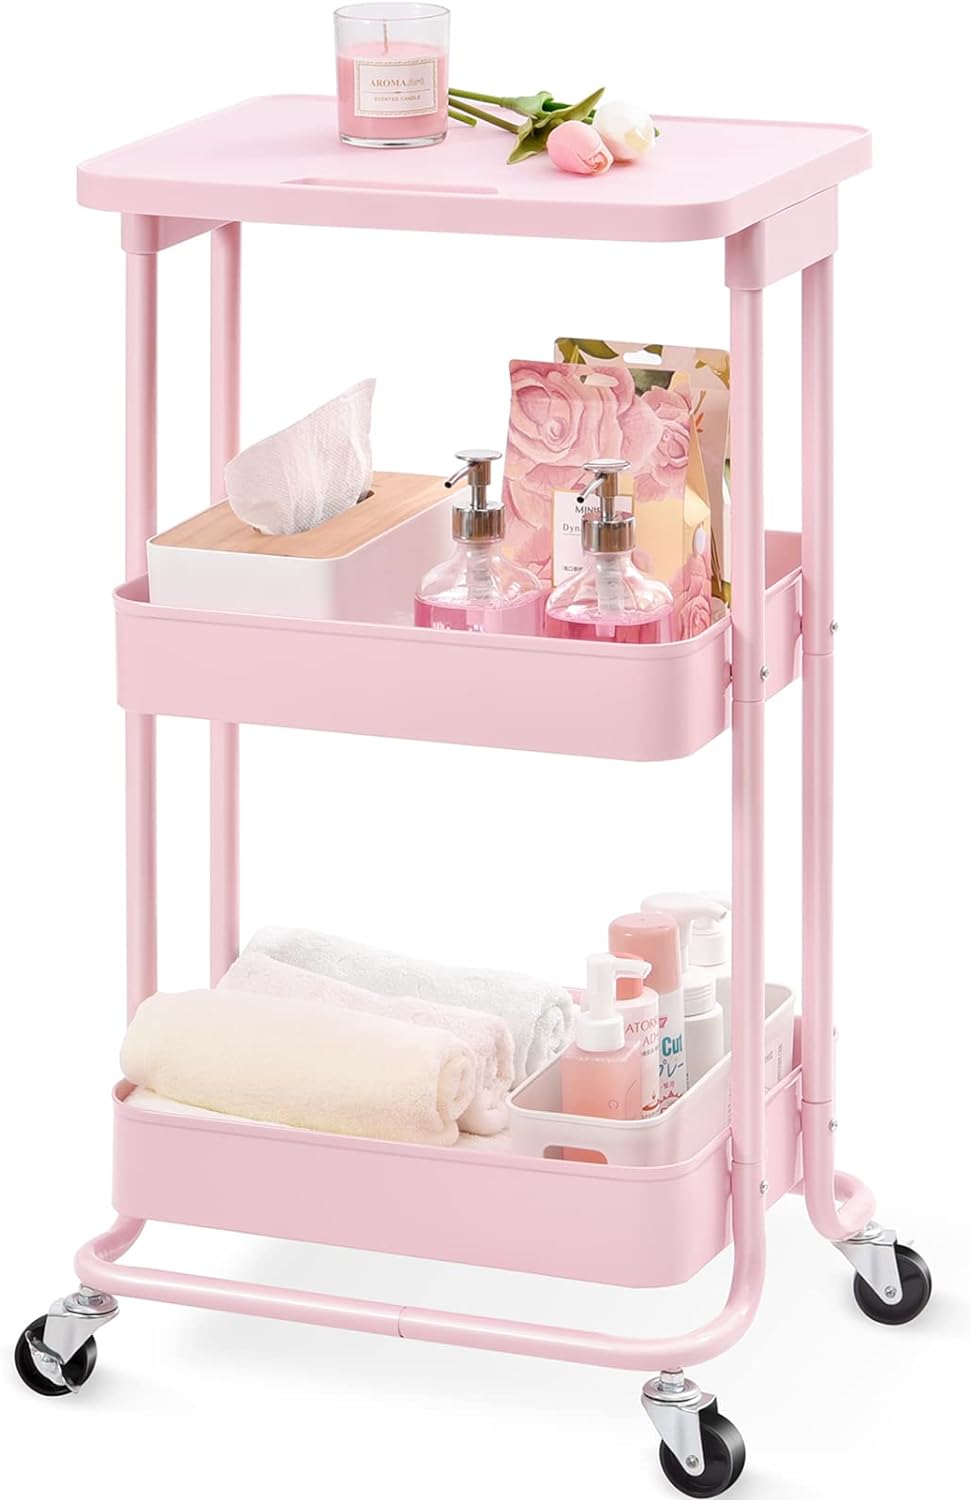 This cart is perfect for what Im using it for. Its so cute, easy to assemble, and so sturdy.